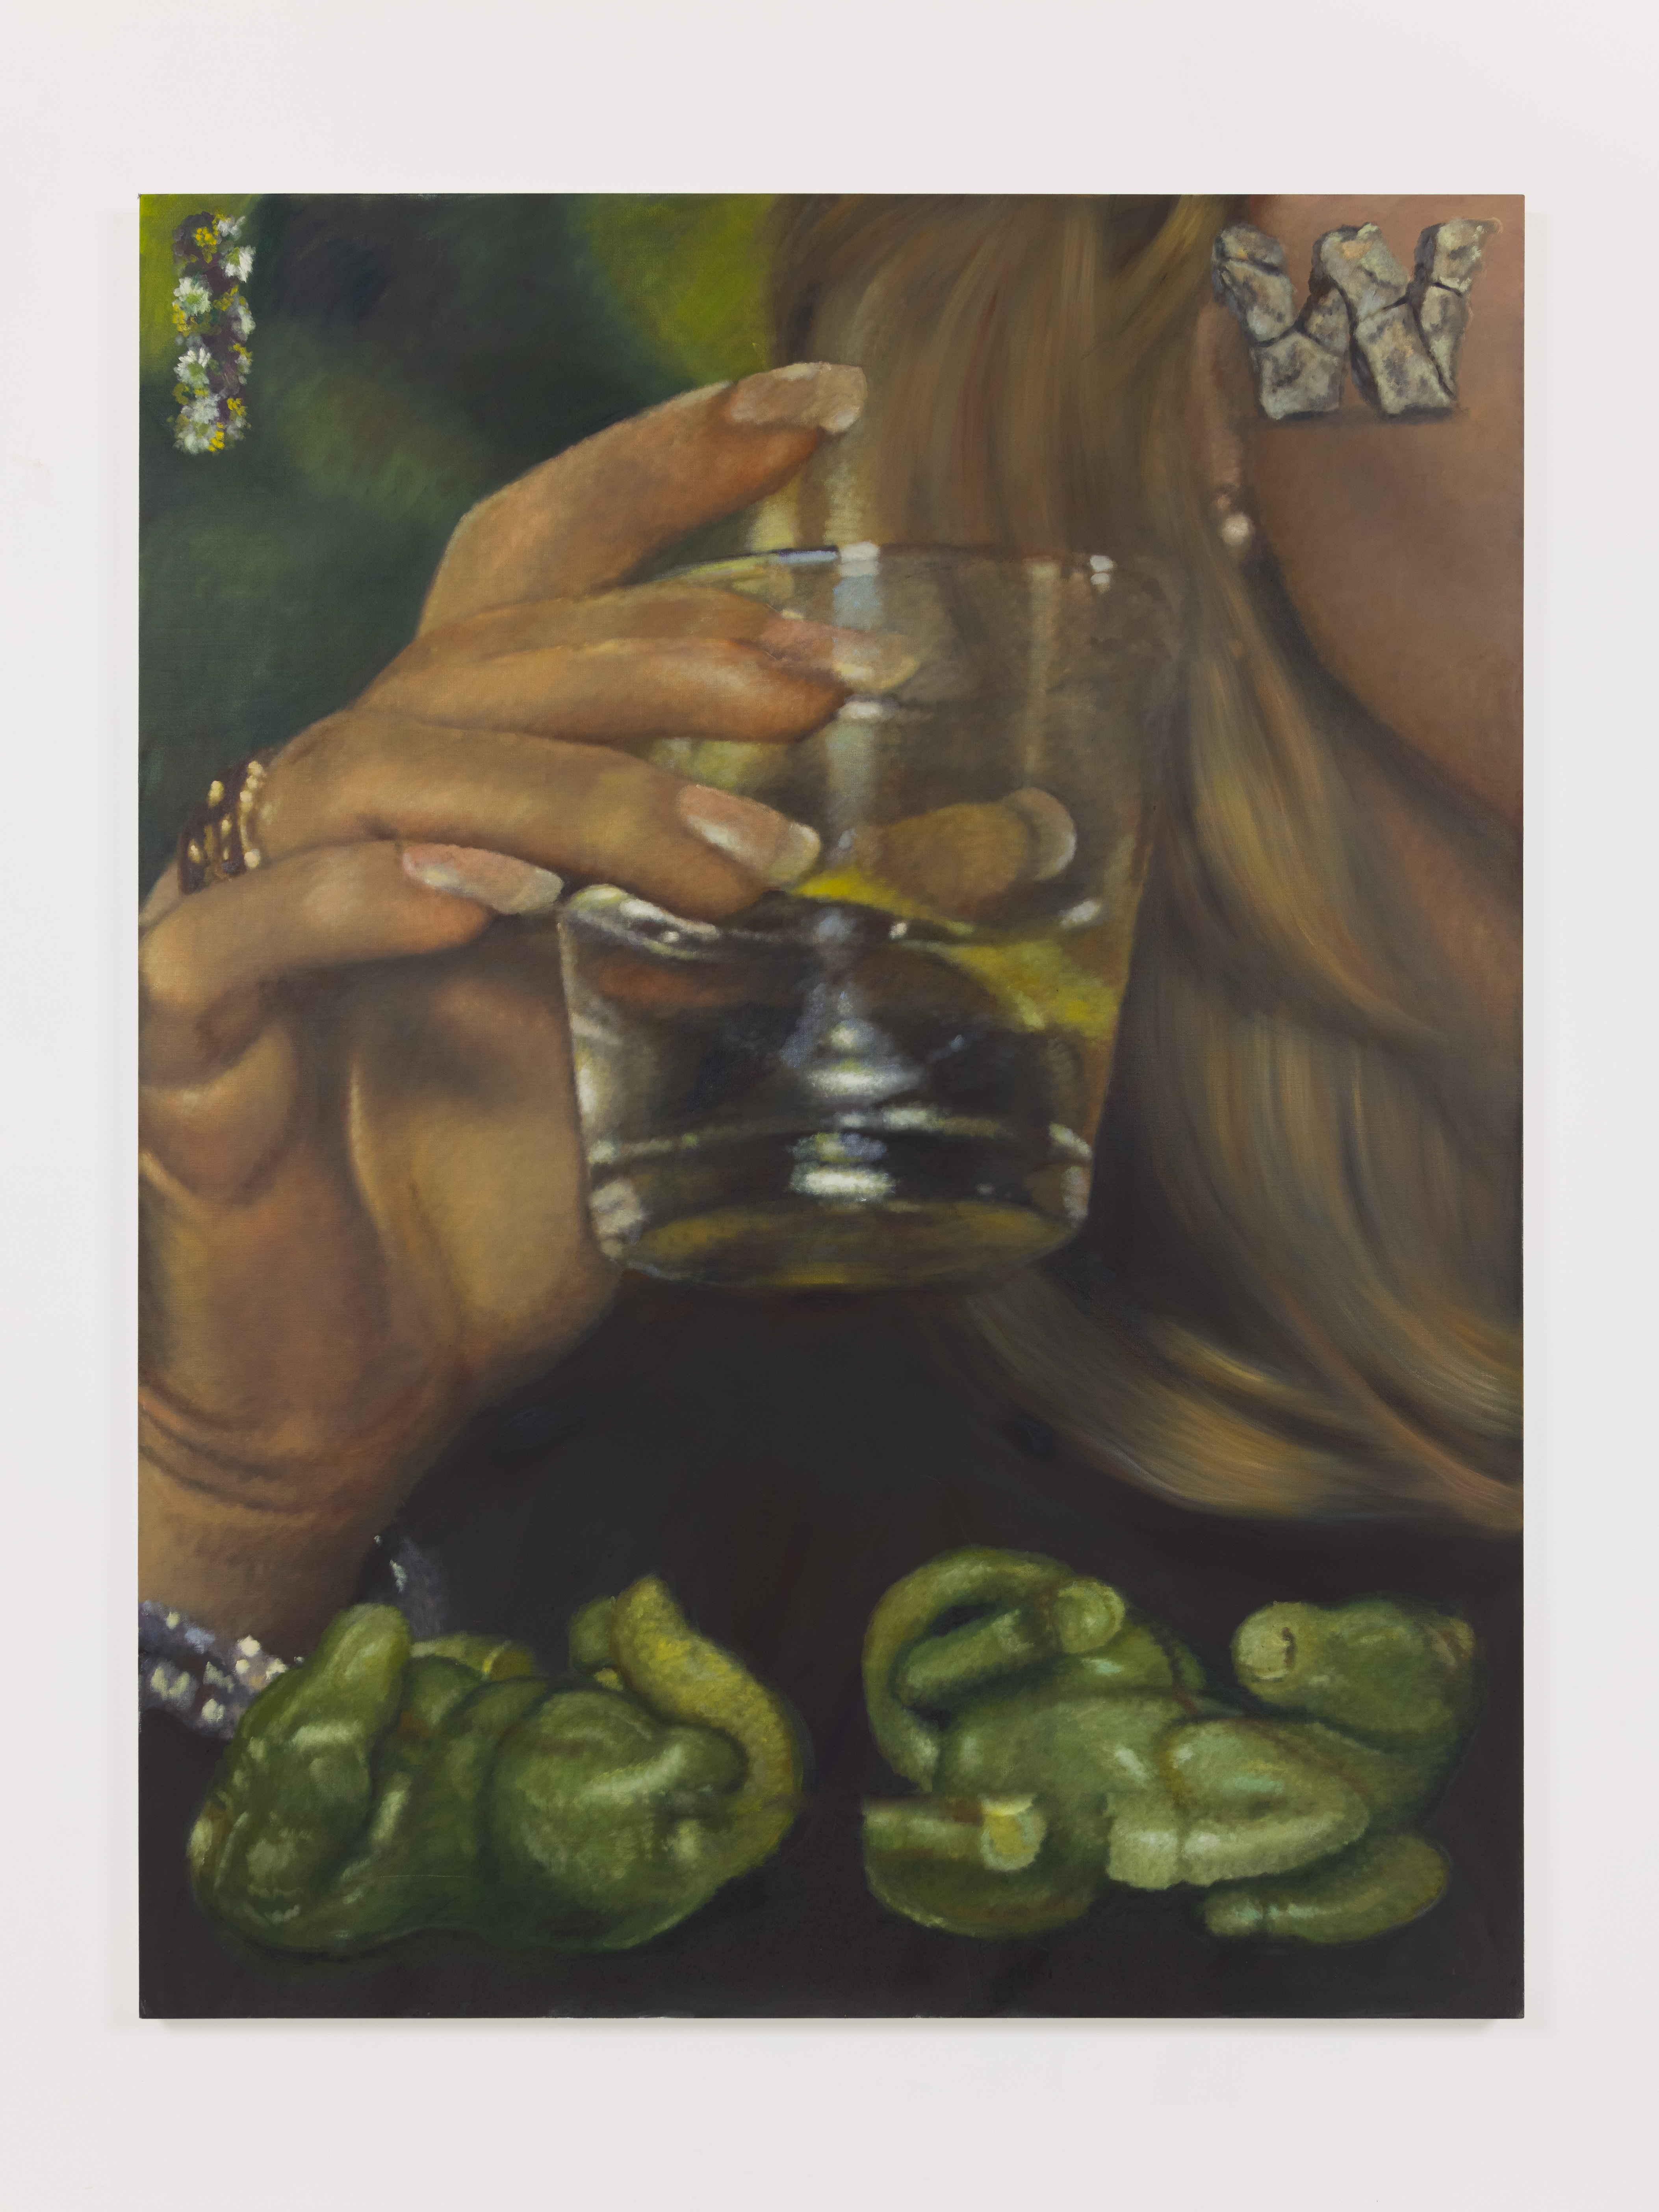 Issy Wood - Goldie Hawn’s character with drinking problem, 2020 Oil on linen